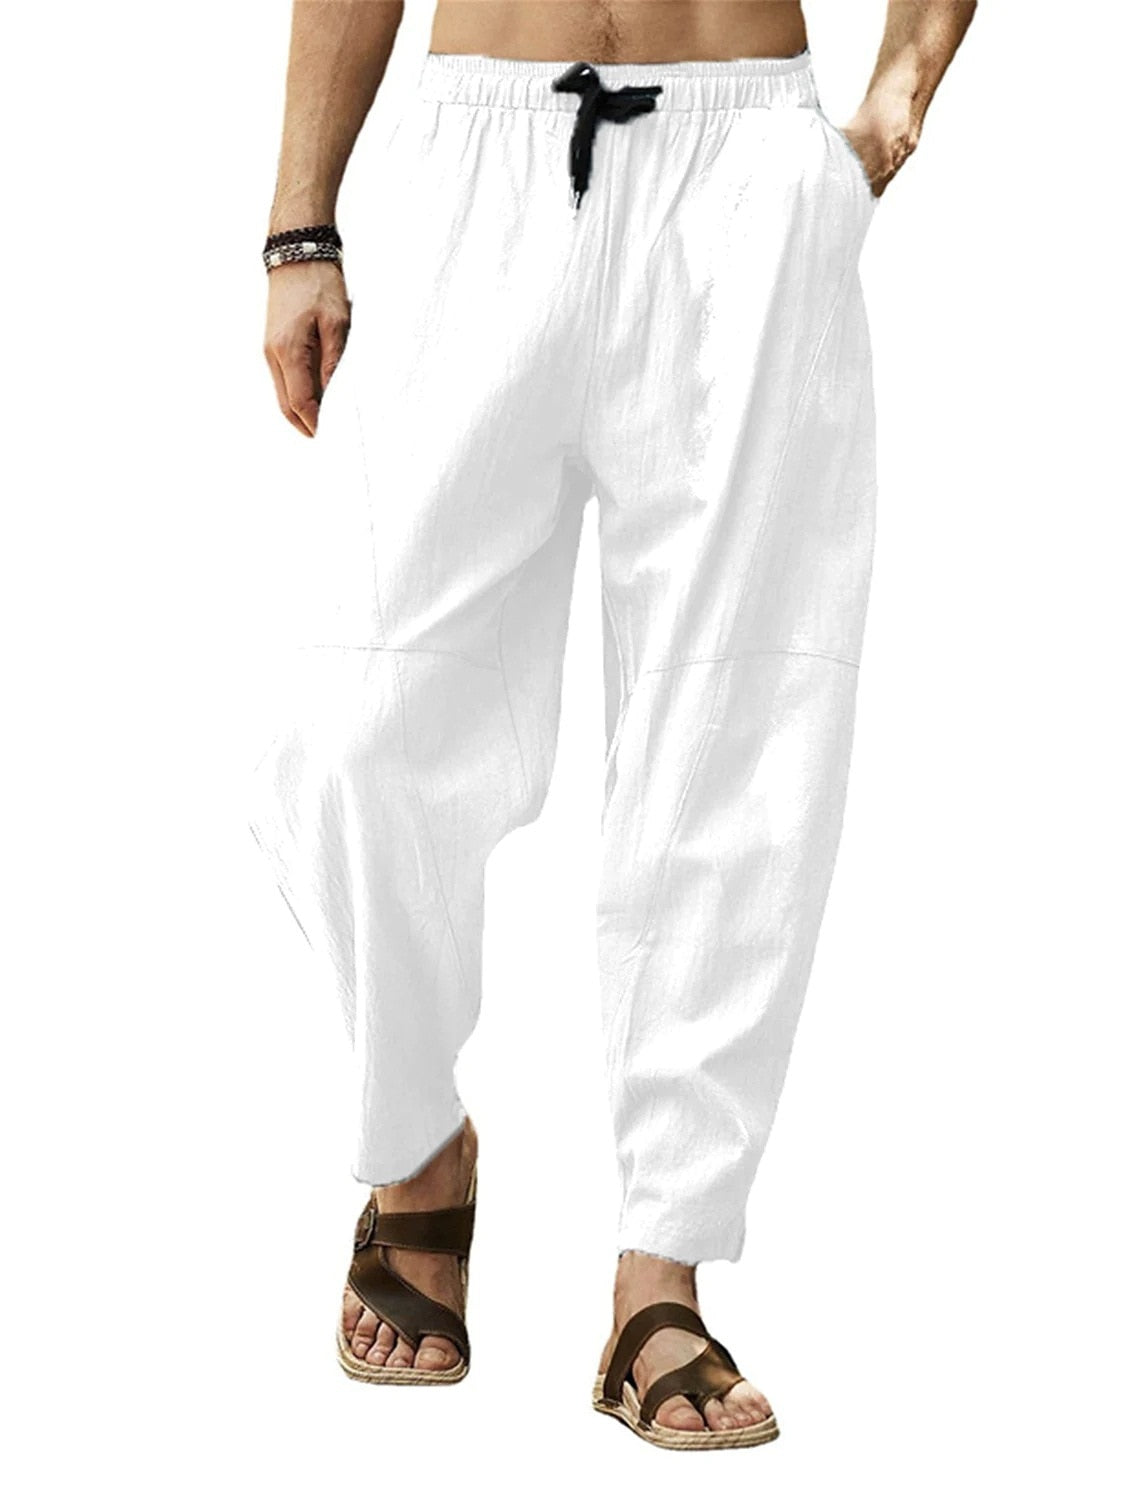 Meditation Clothes - Men's Cotton Linen Pants Male Autumn New Breathable Solid Color Linen Trousers Fitness - Personal Hour for Yoga and Meditations 